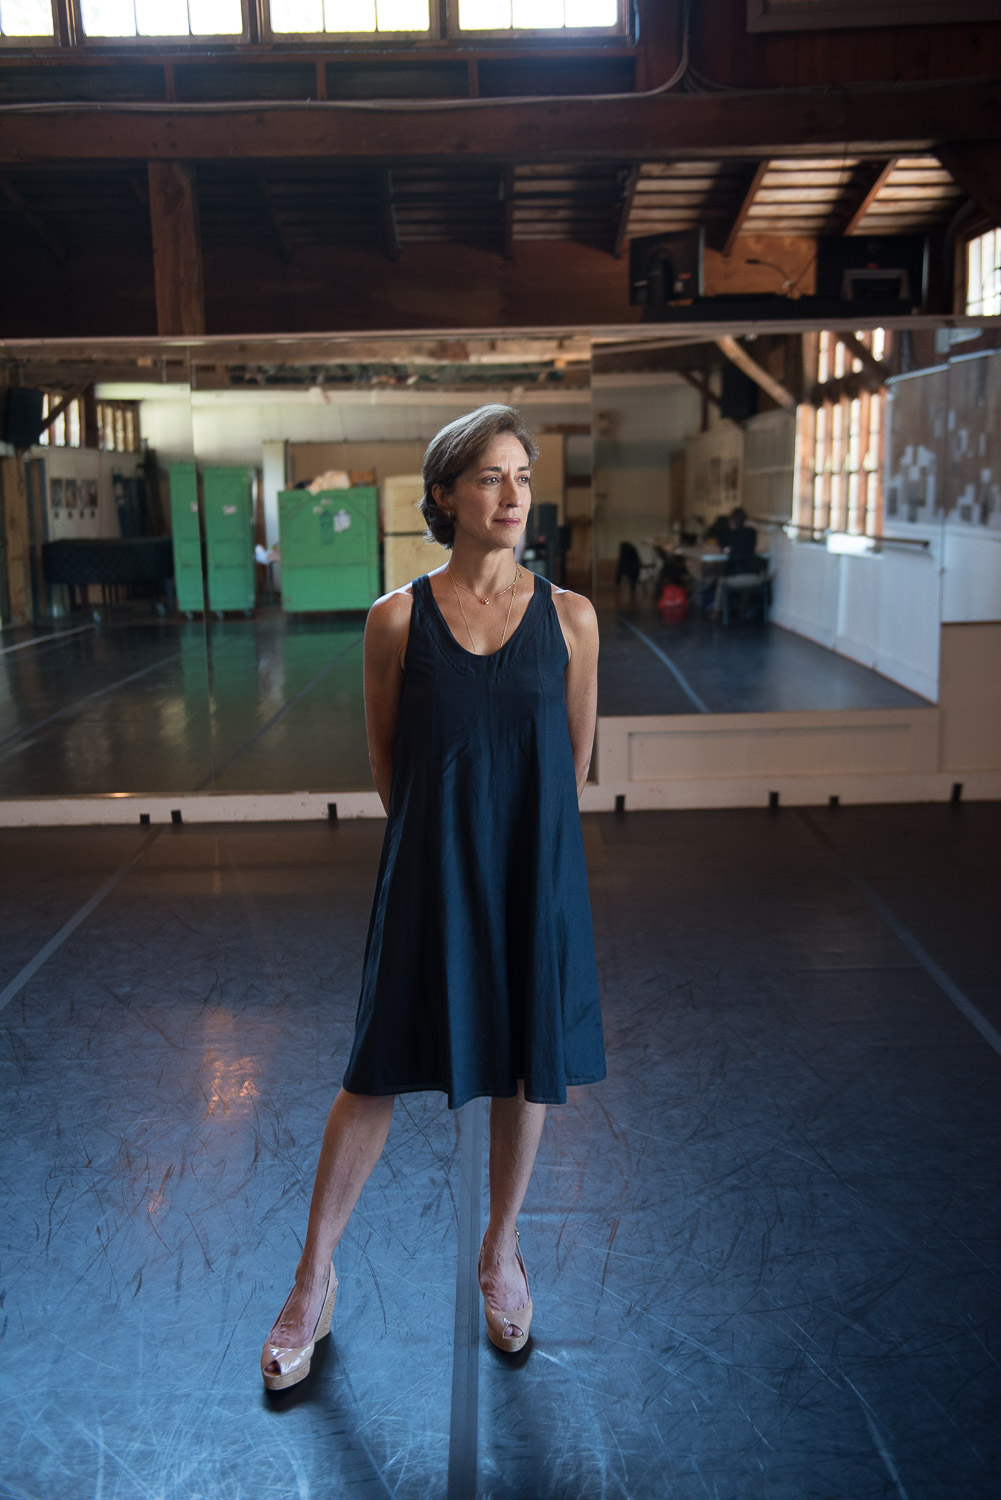 Women Leaders in Dance at Jacob's Pillow by Christopher Duggan